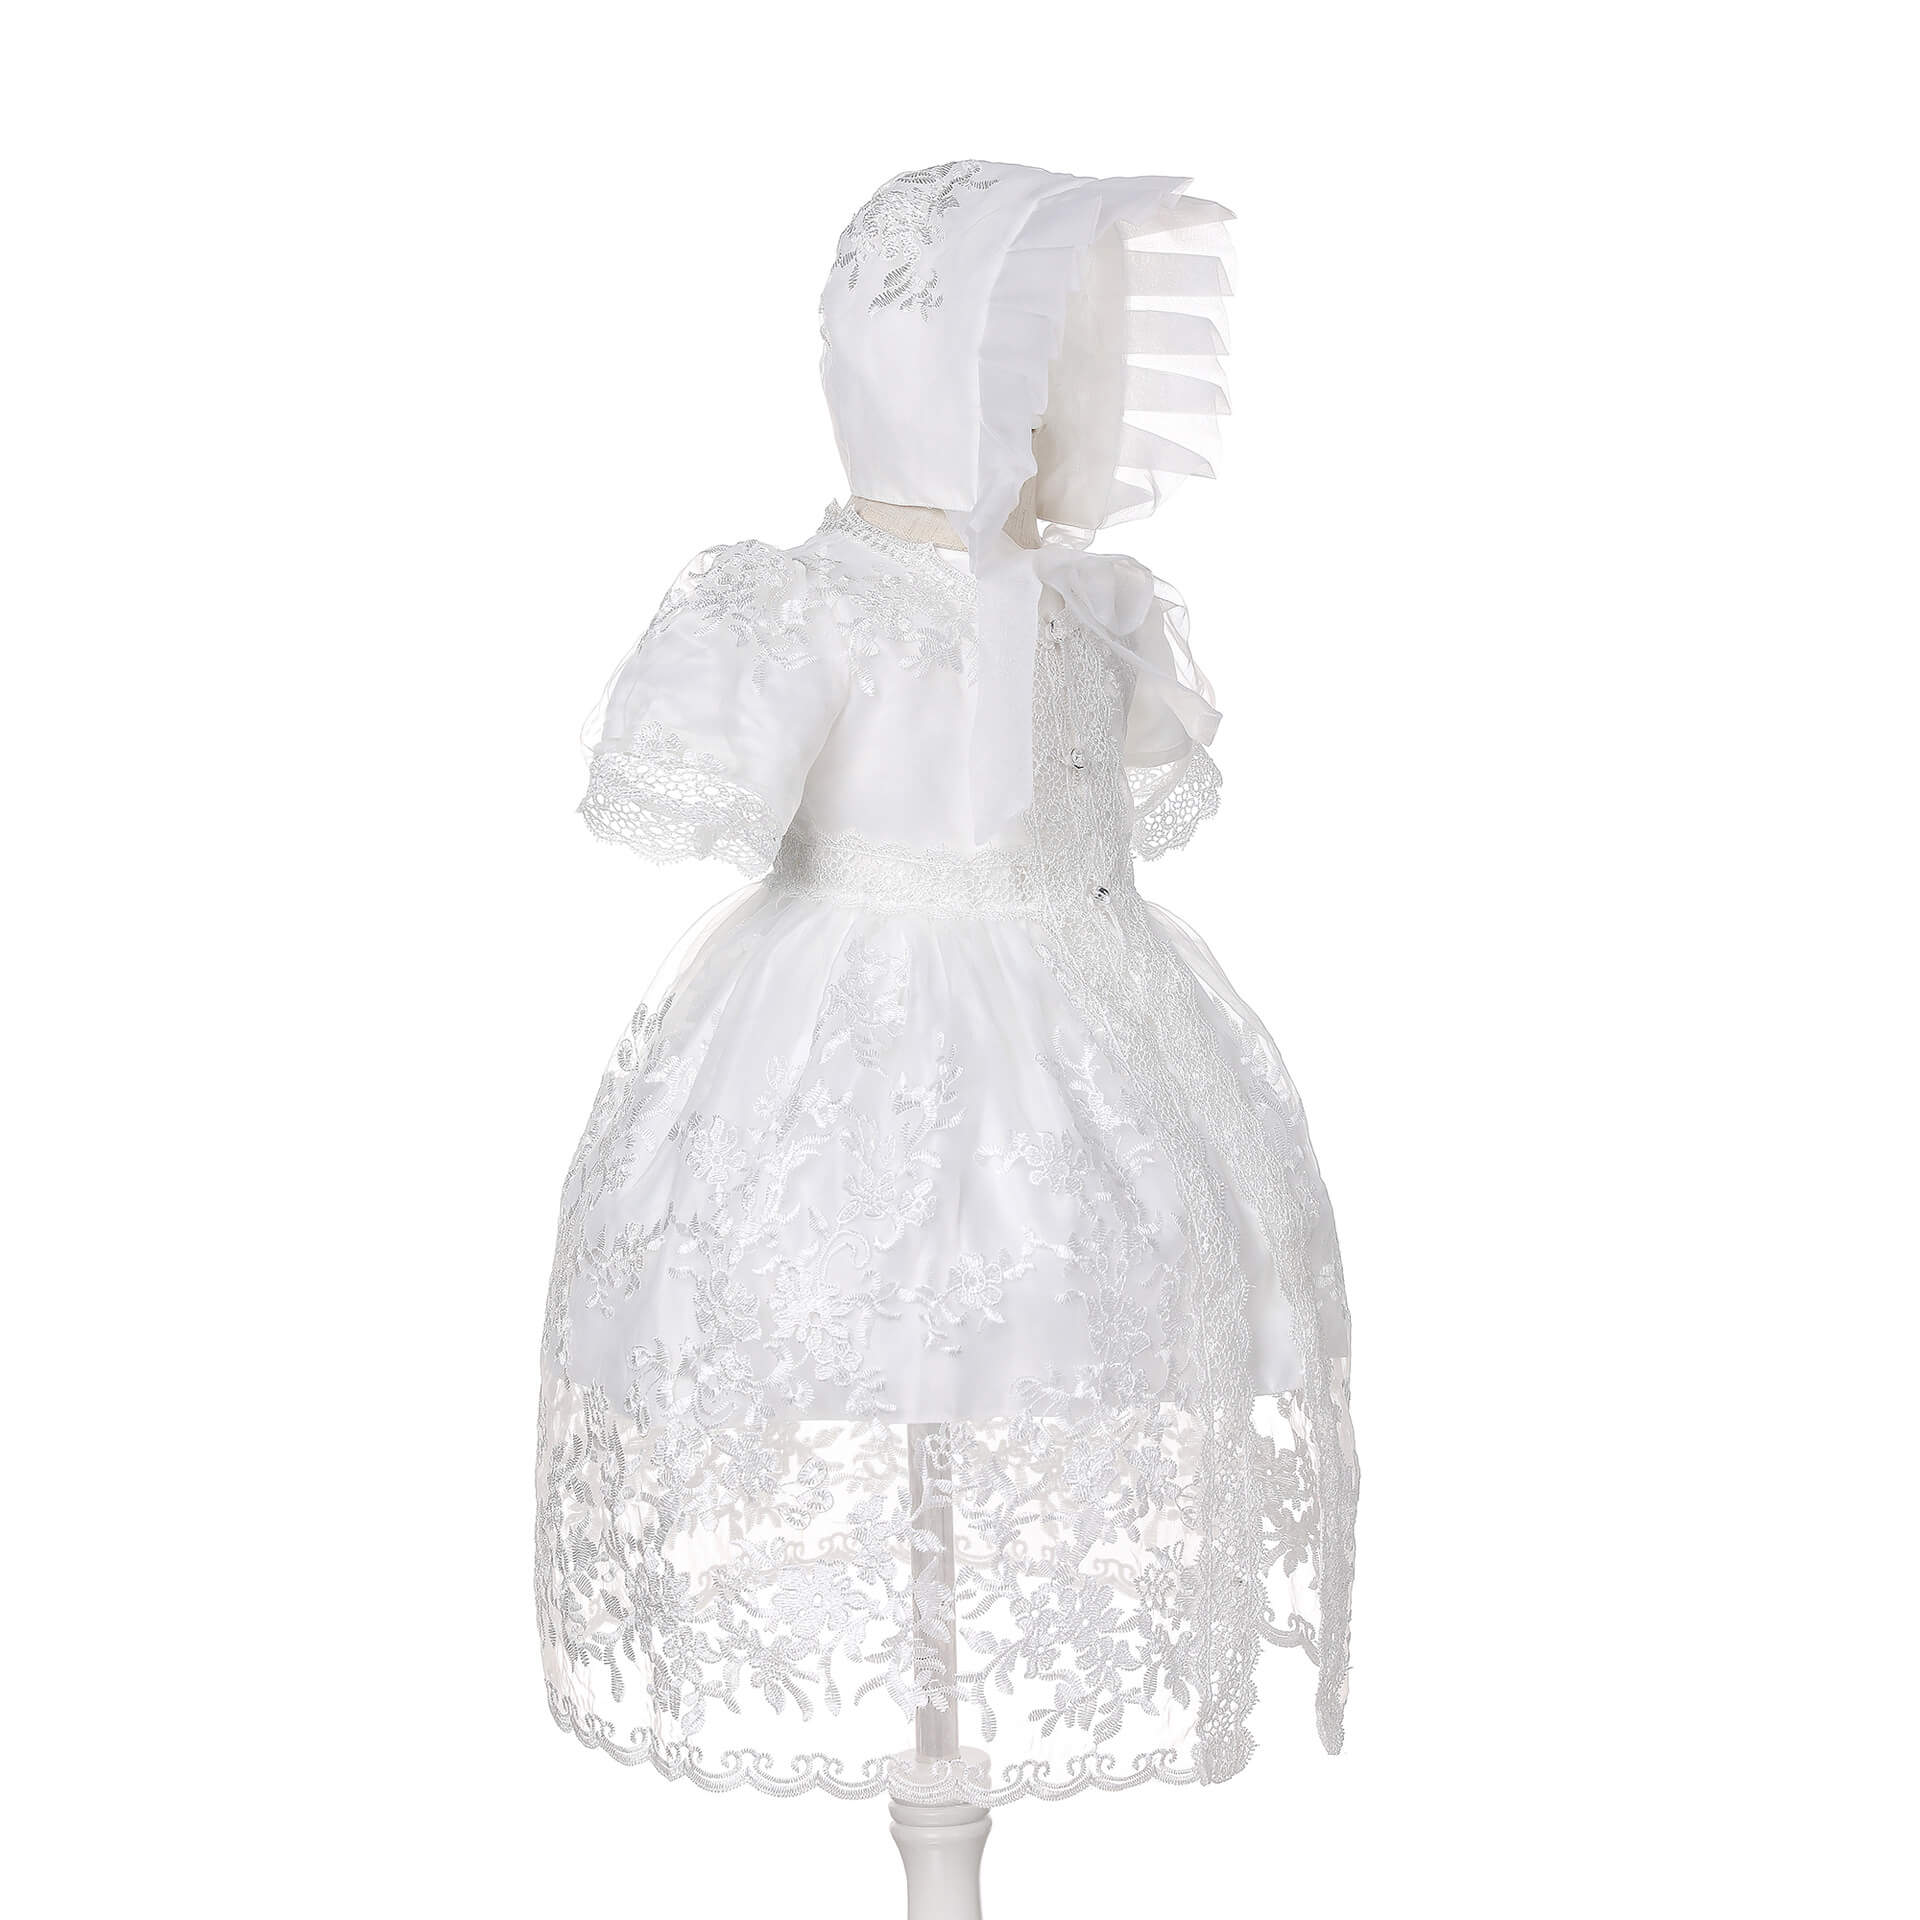 Baby Girls Christening Dress Newborn Lace Flower Embroidered Christening Gown Cape Bonnet and Headwear